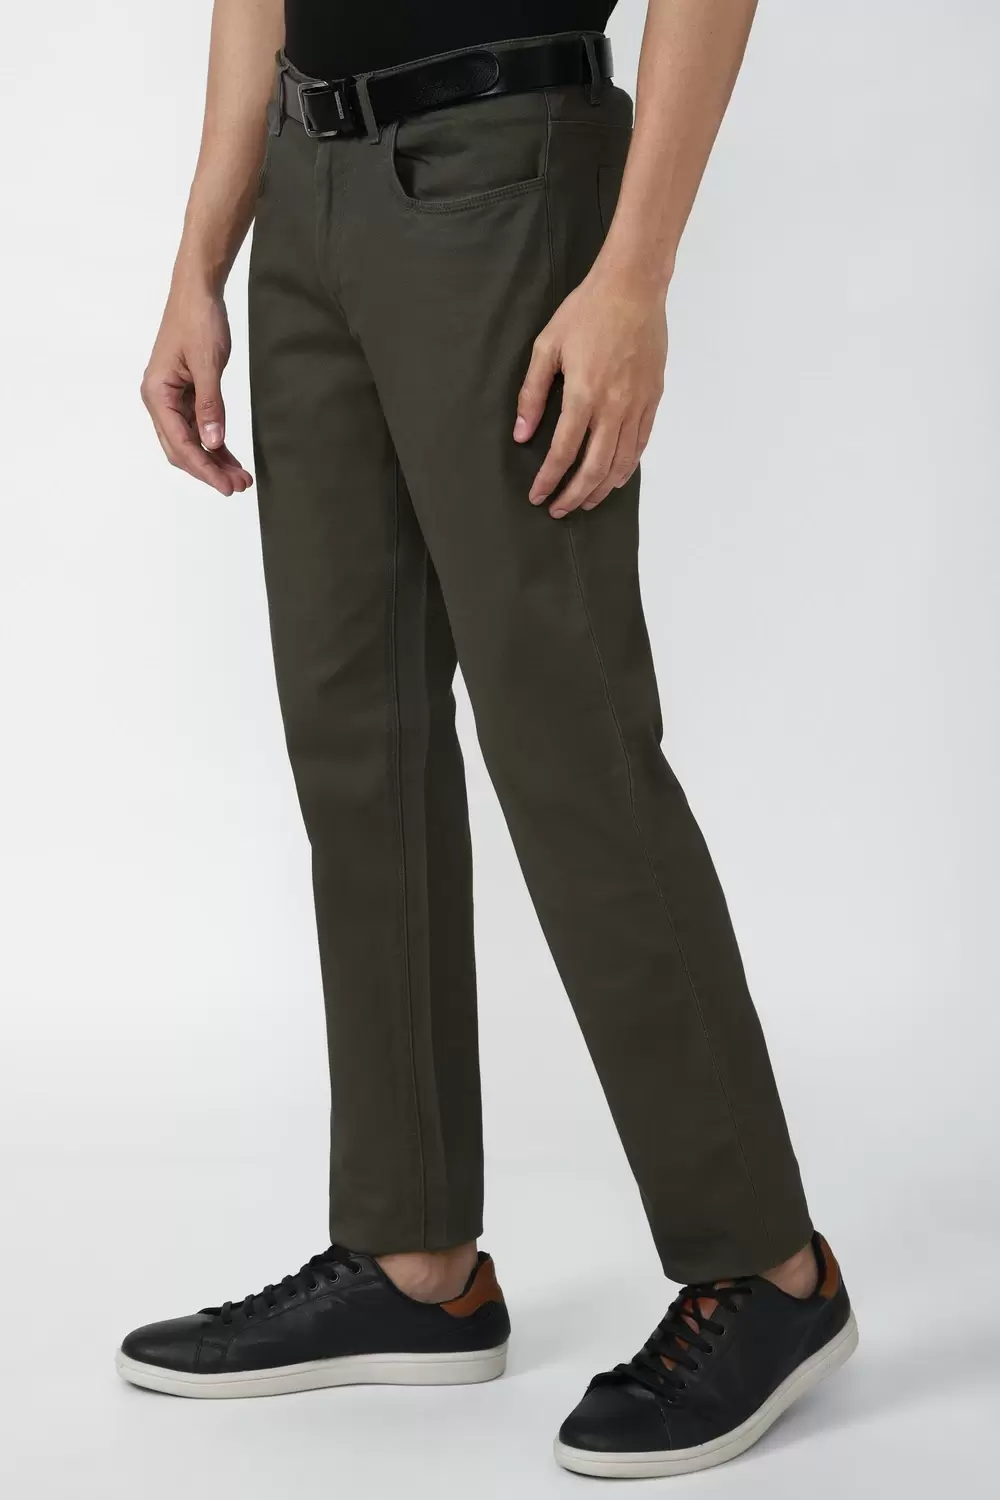 Men Casual Trousers - Buy Casual Pants for Men in India - Myntra